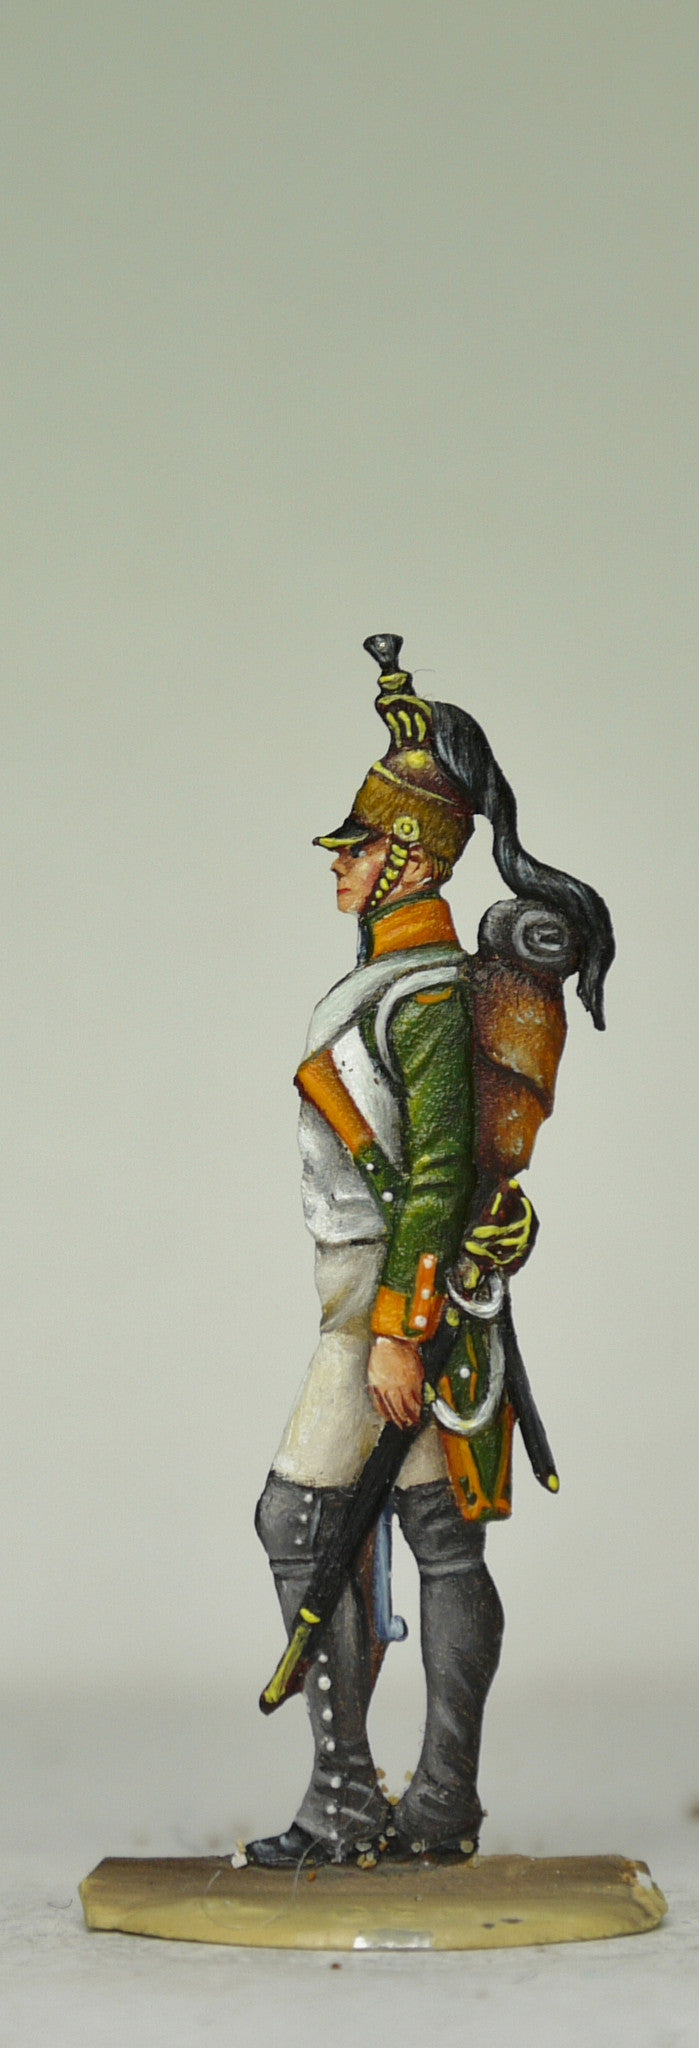 French foot dragoon - Glorious Empires-Historical Miniatures  